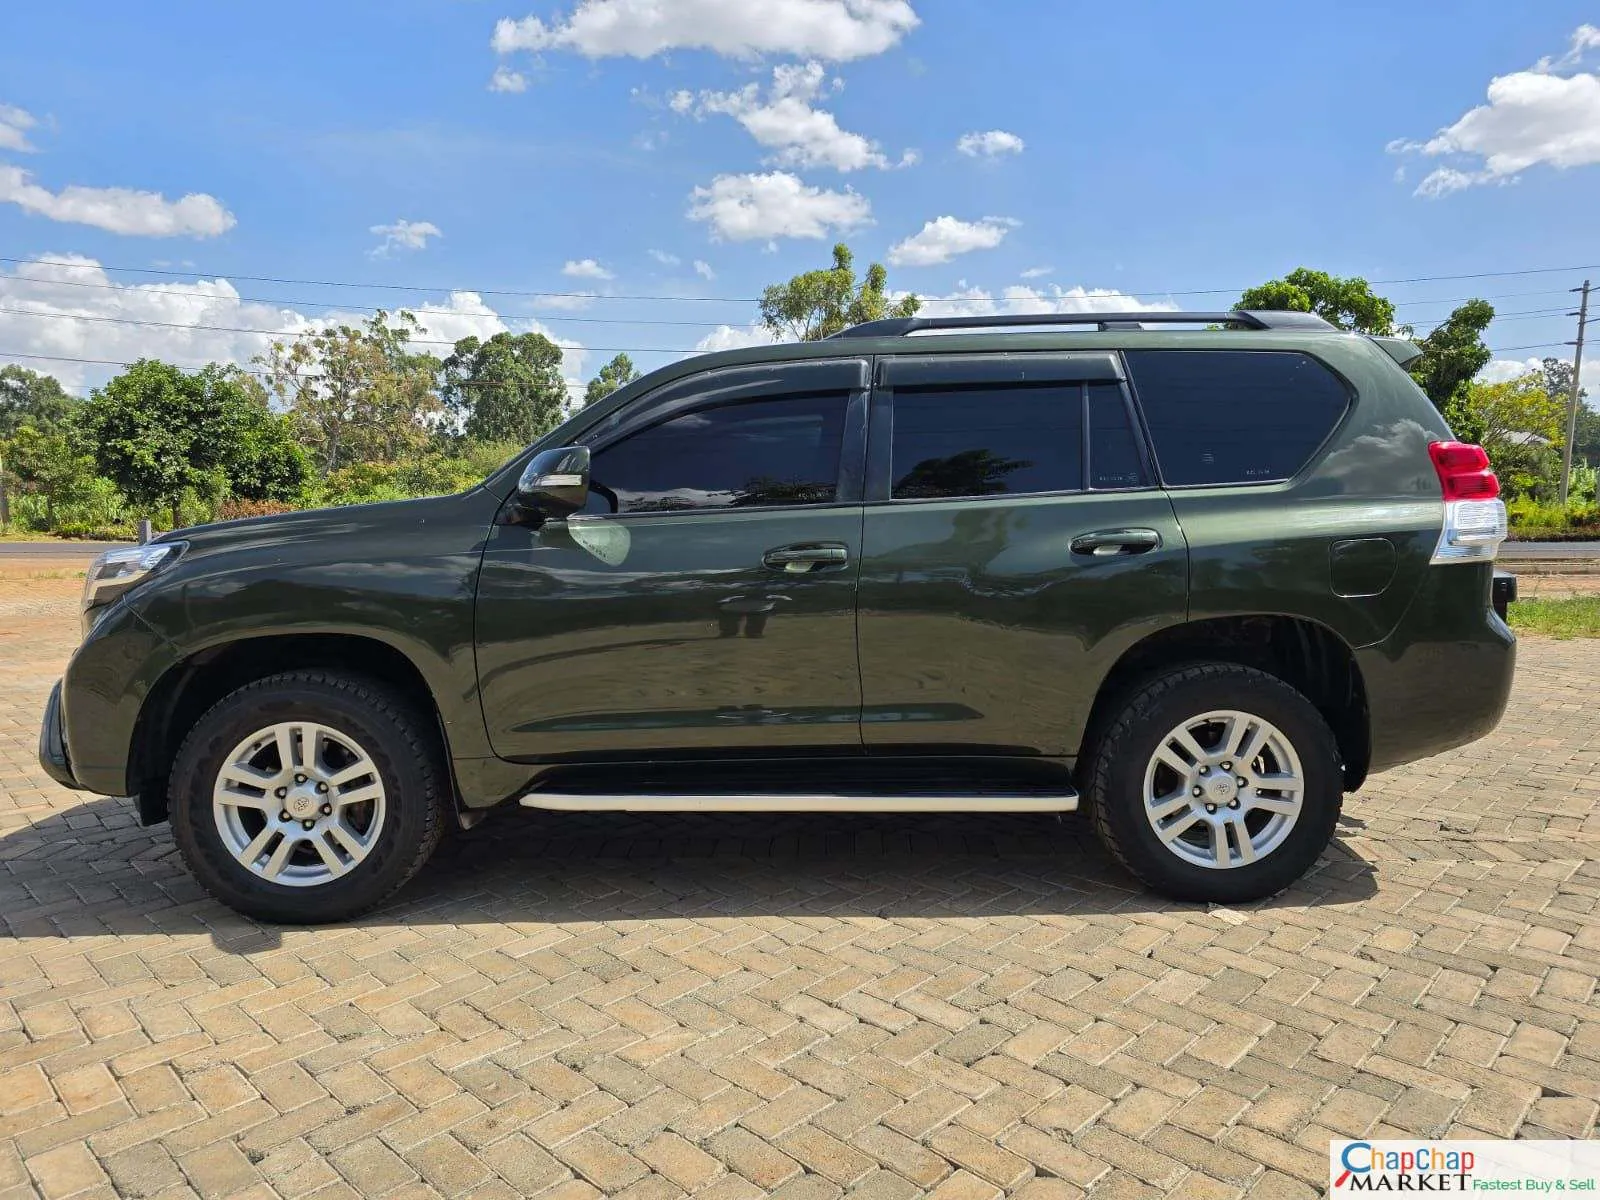 Toyota Prado VXL Fully Loaded You Pay 40% Deposit Trade in OK New hire purchase installments